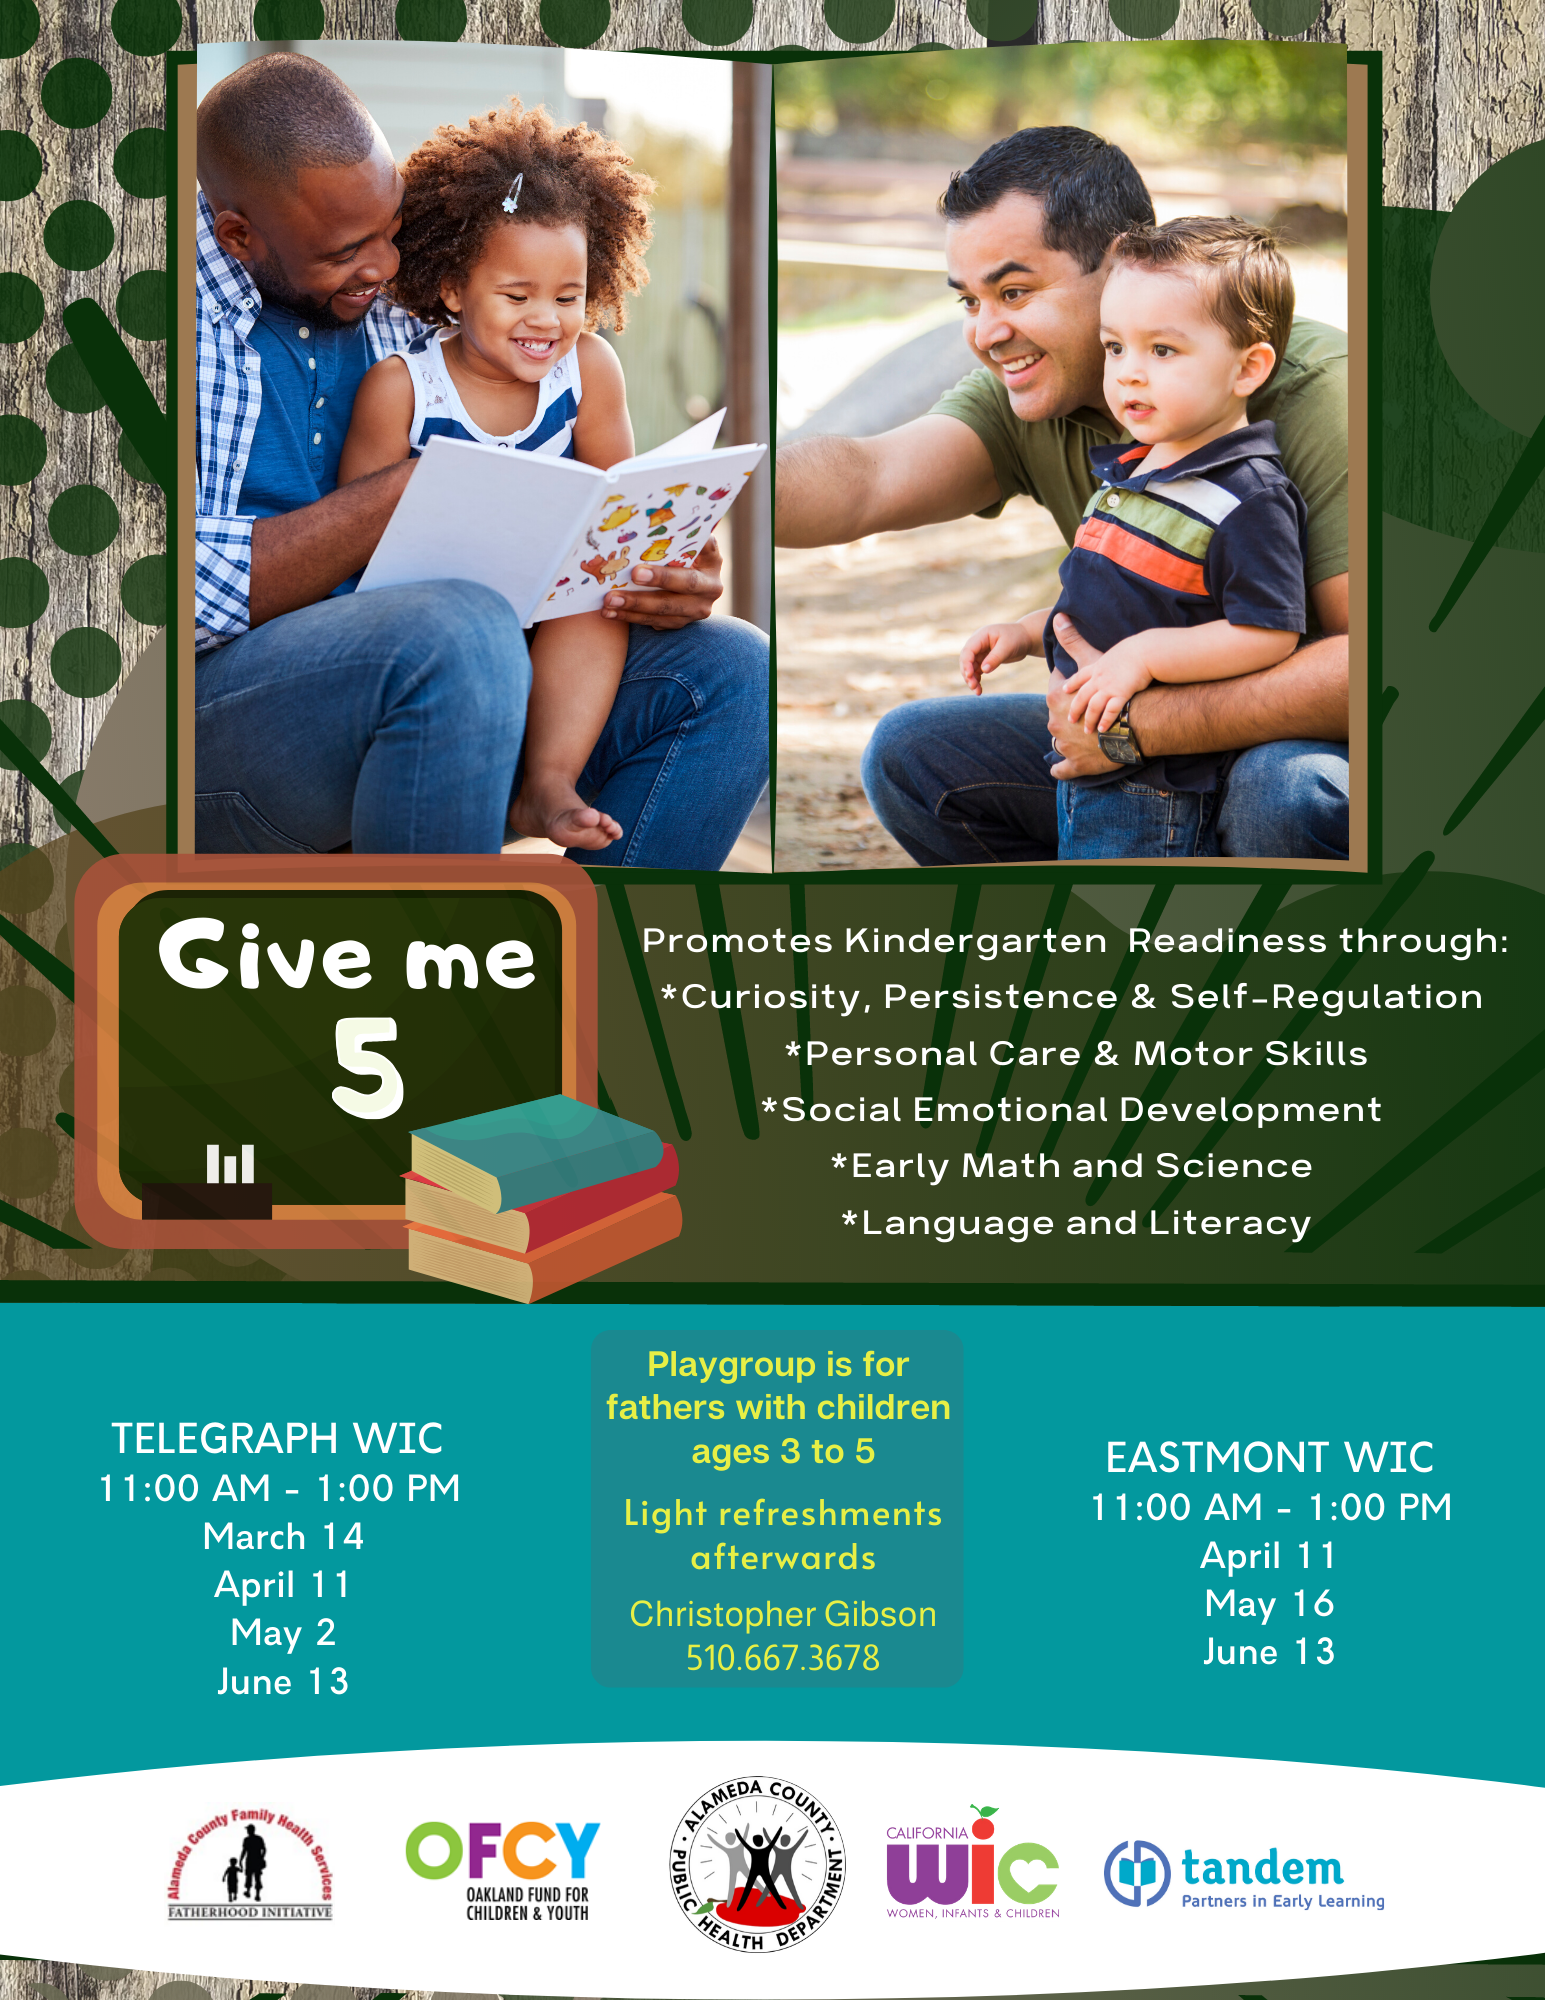 Free Give Me 5 Sessions for Fathers at Telegraph WIC